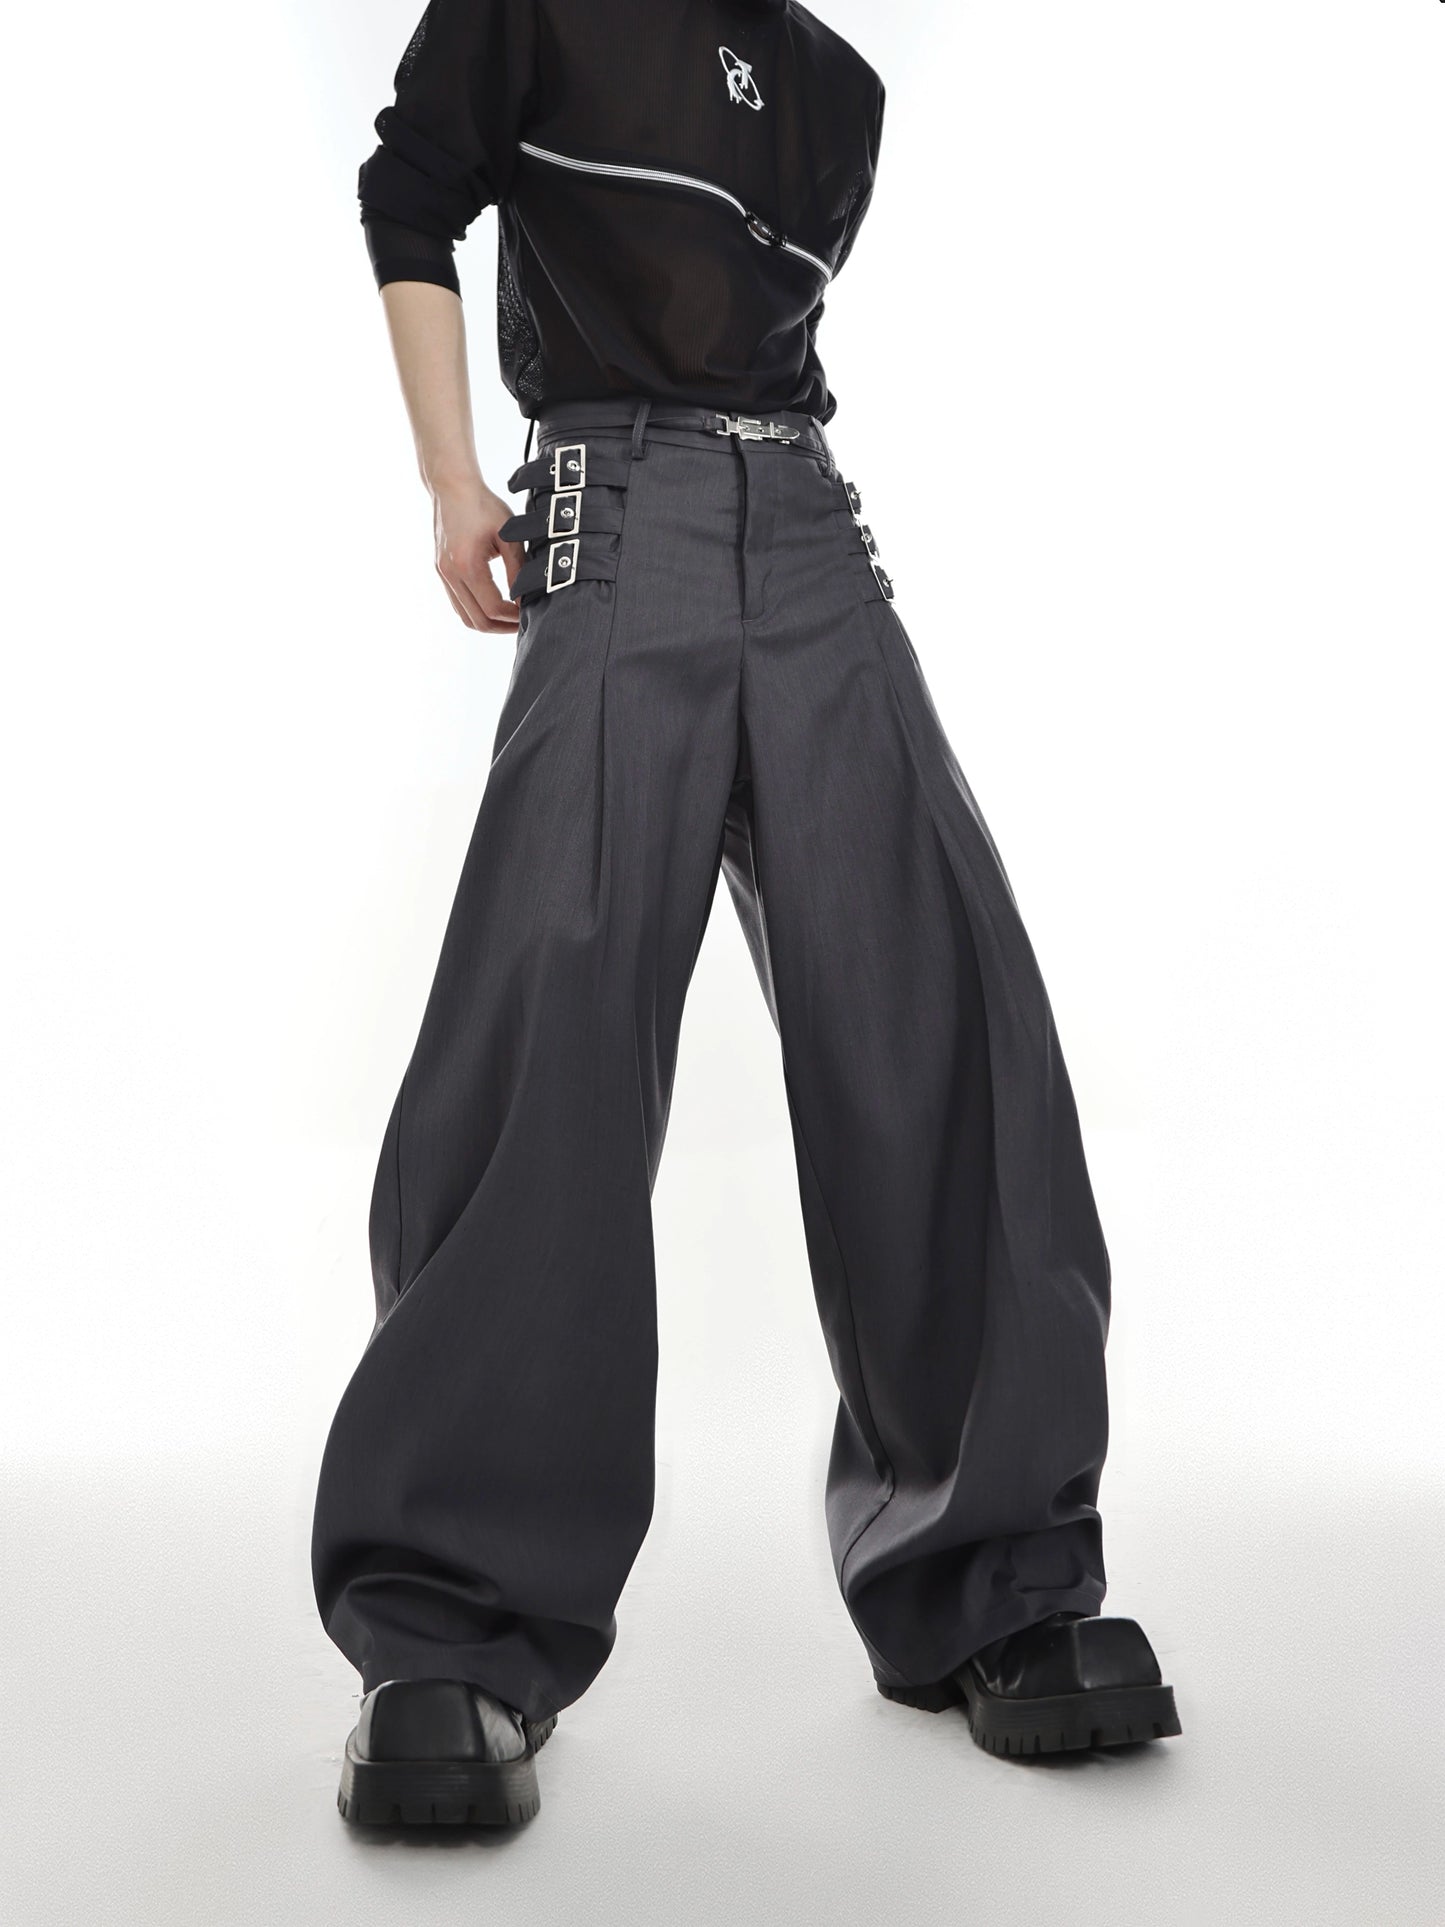 CulturE niche deconstructed metal webbing panels, wide-leg trousers for loose drape, casual high-waisted design trousers